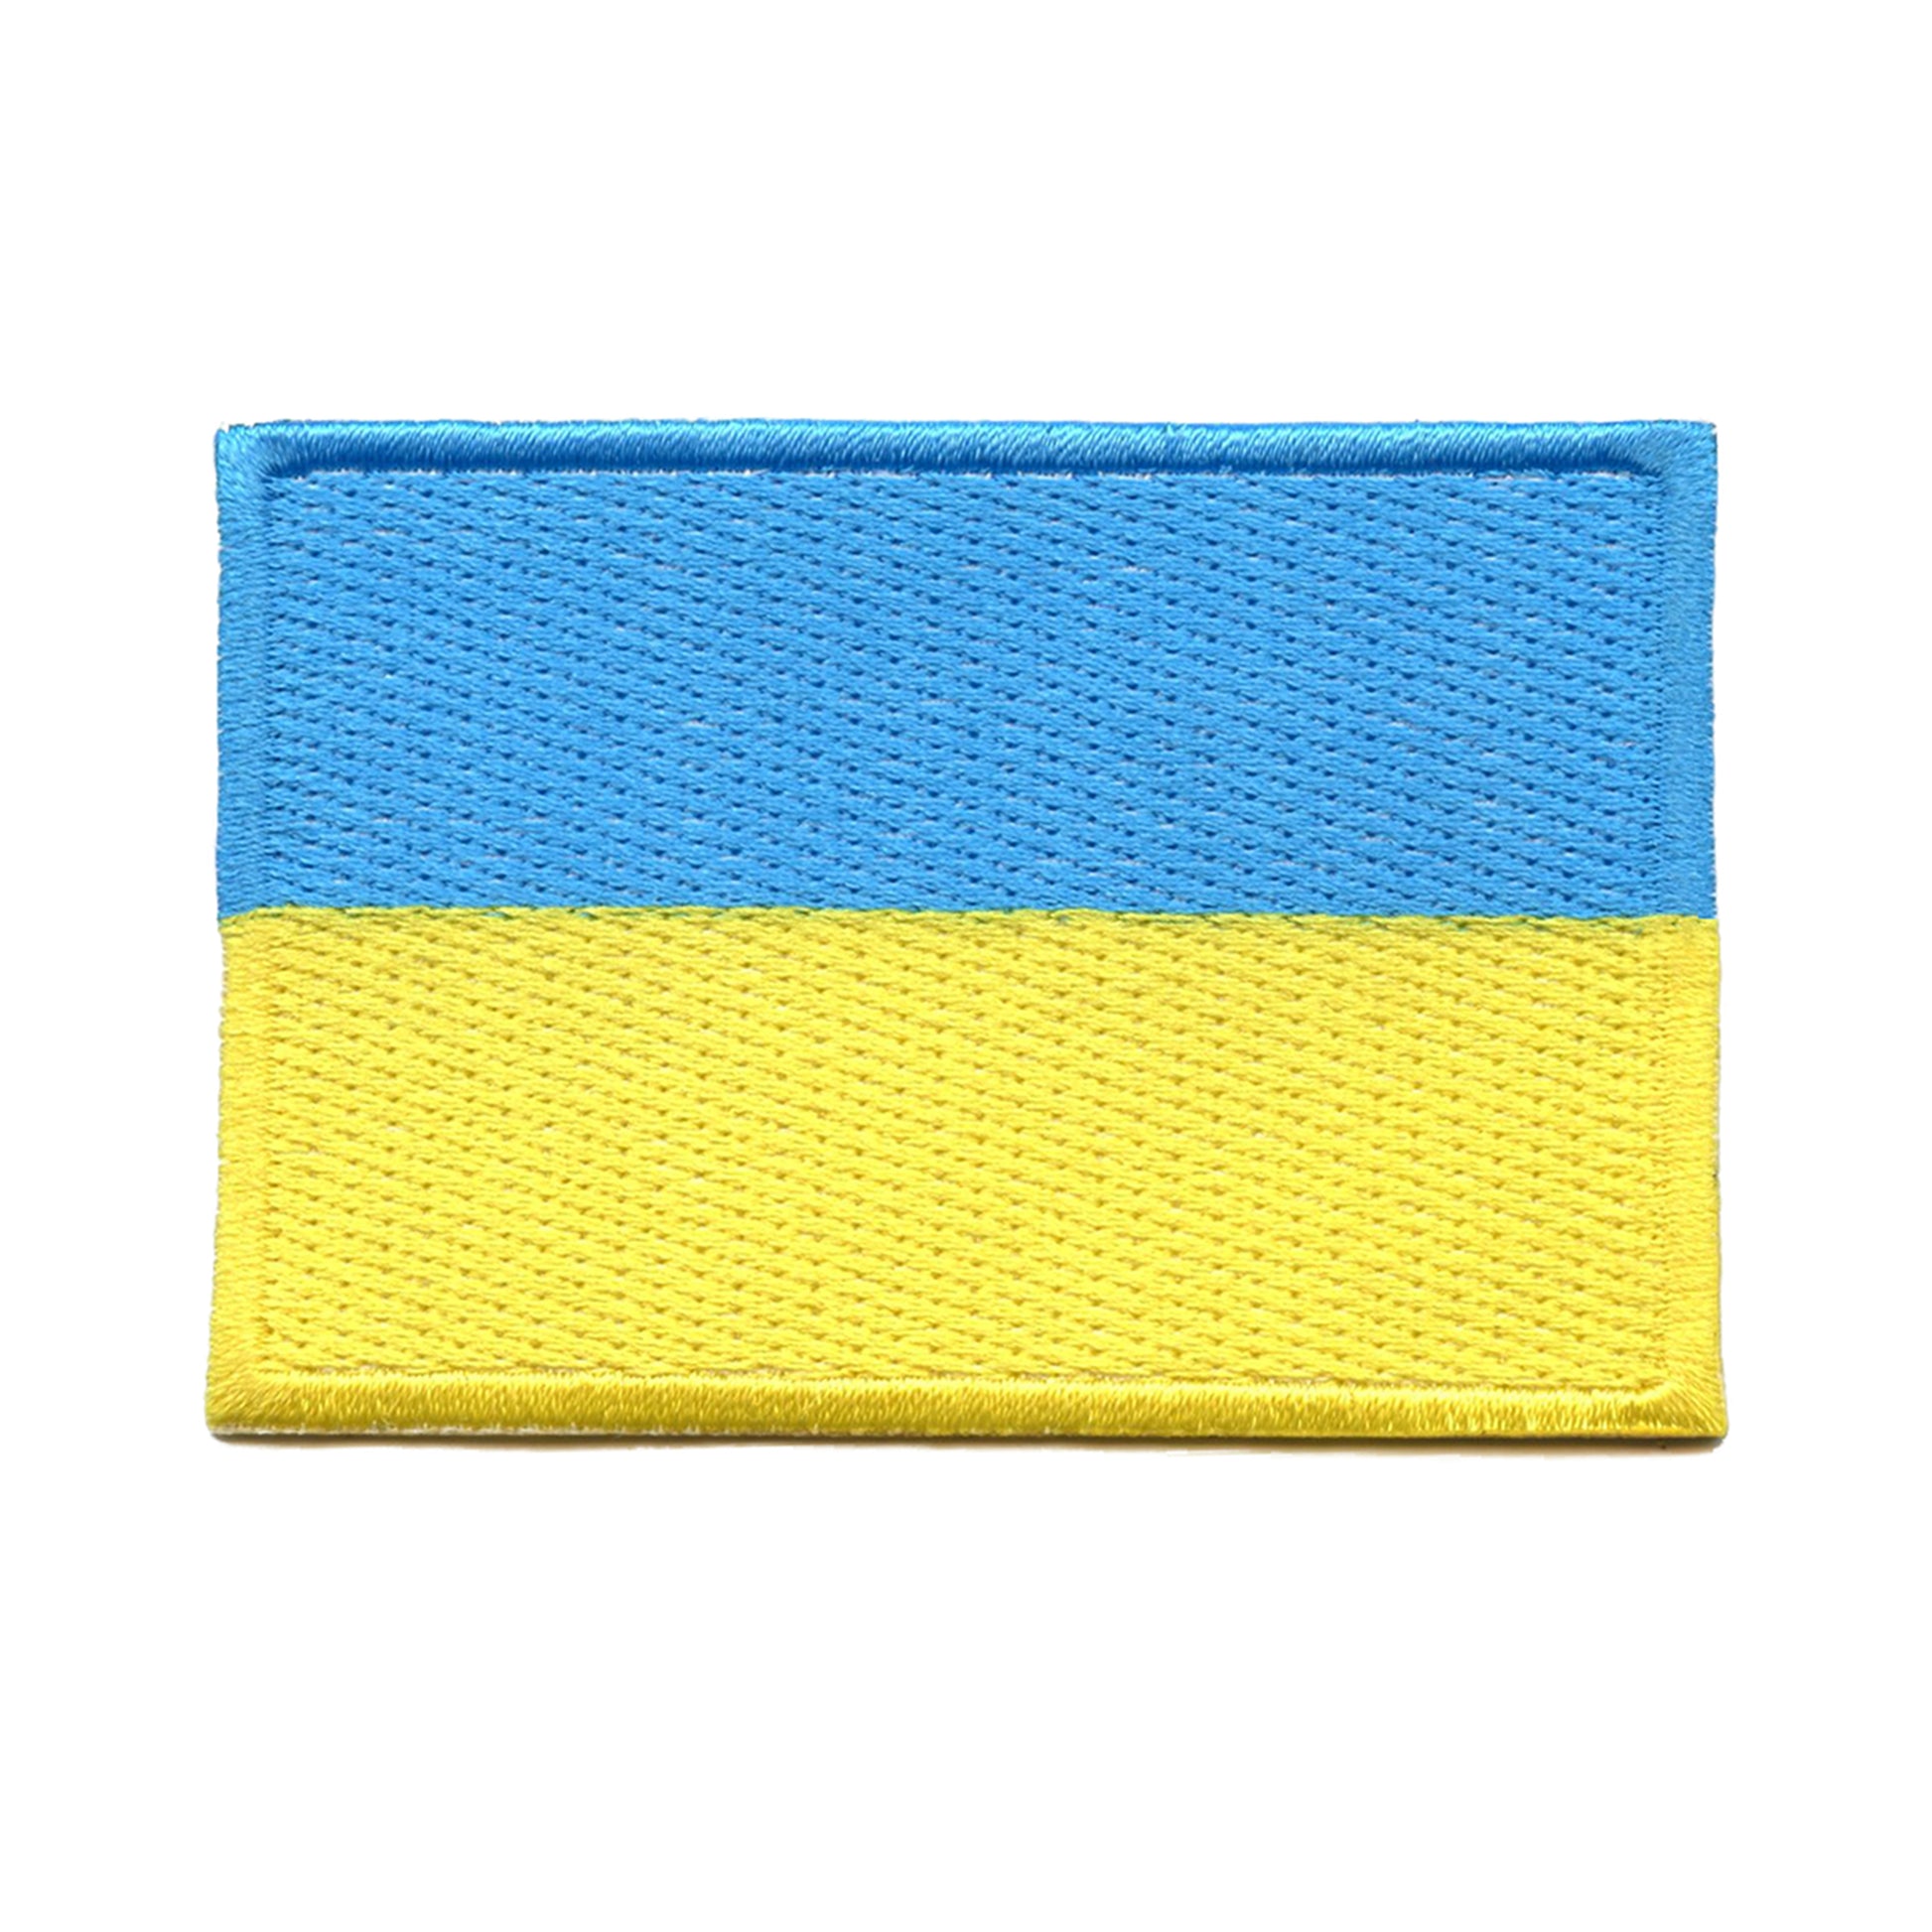 Ukraine Country Flag Patch Pride Prosperity Support Embroidered Iron On 